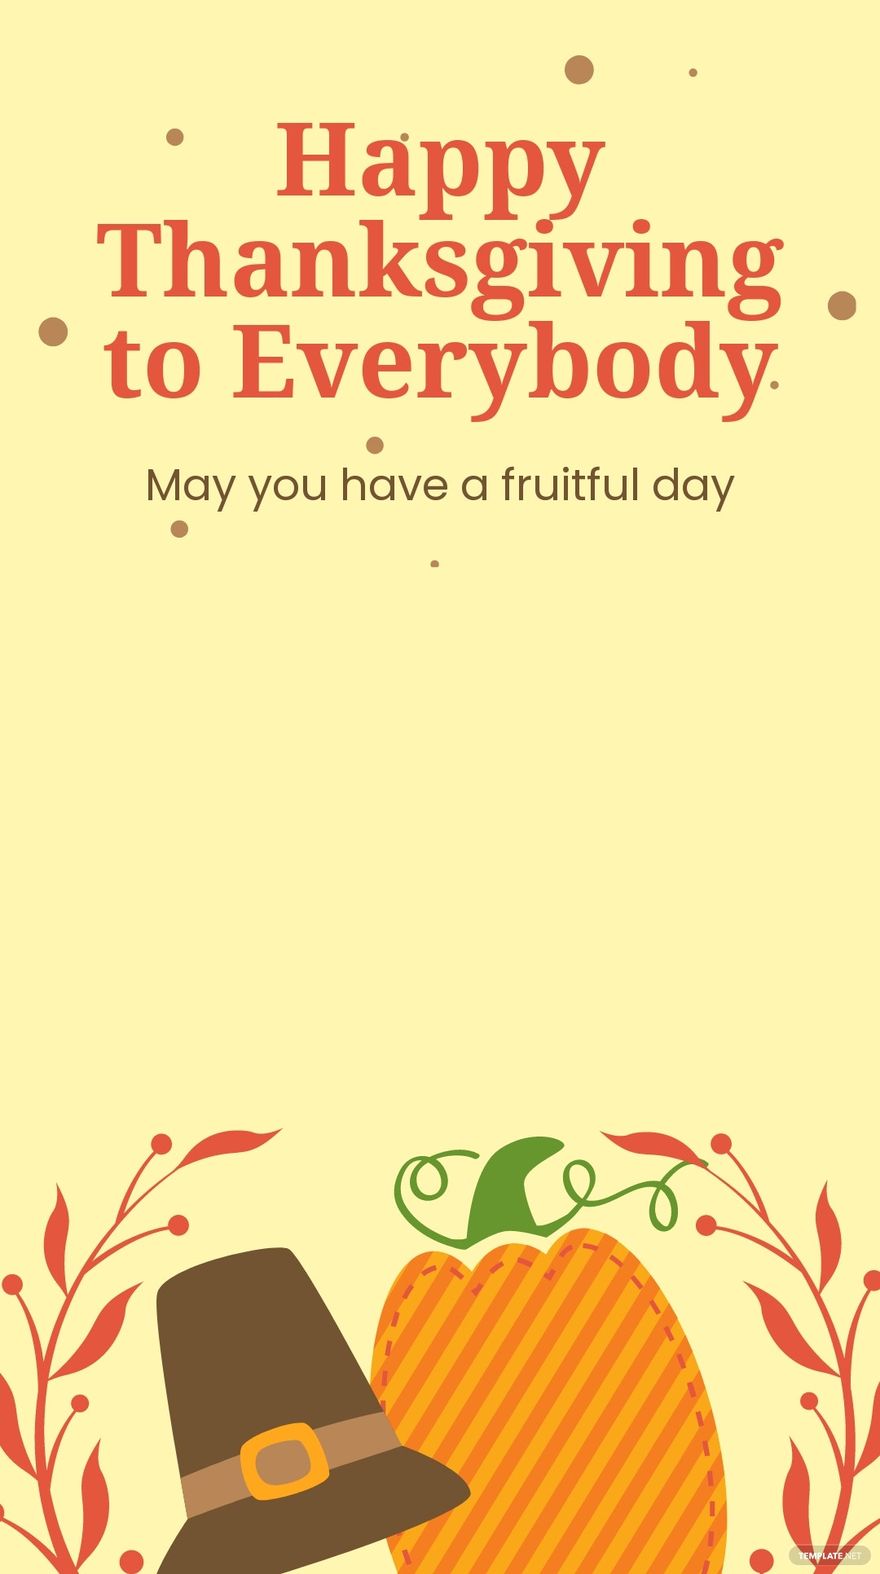 Free Happy Thanksgiving Snapchat Geofilter Template